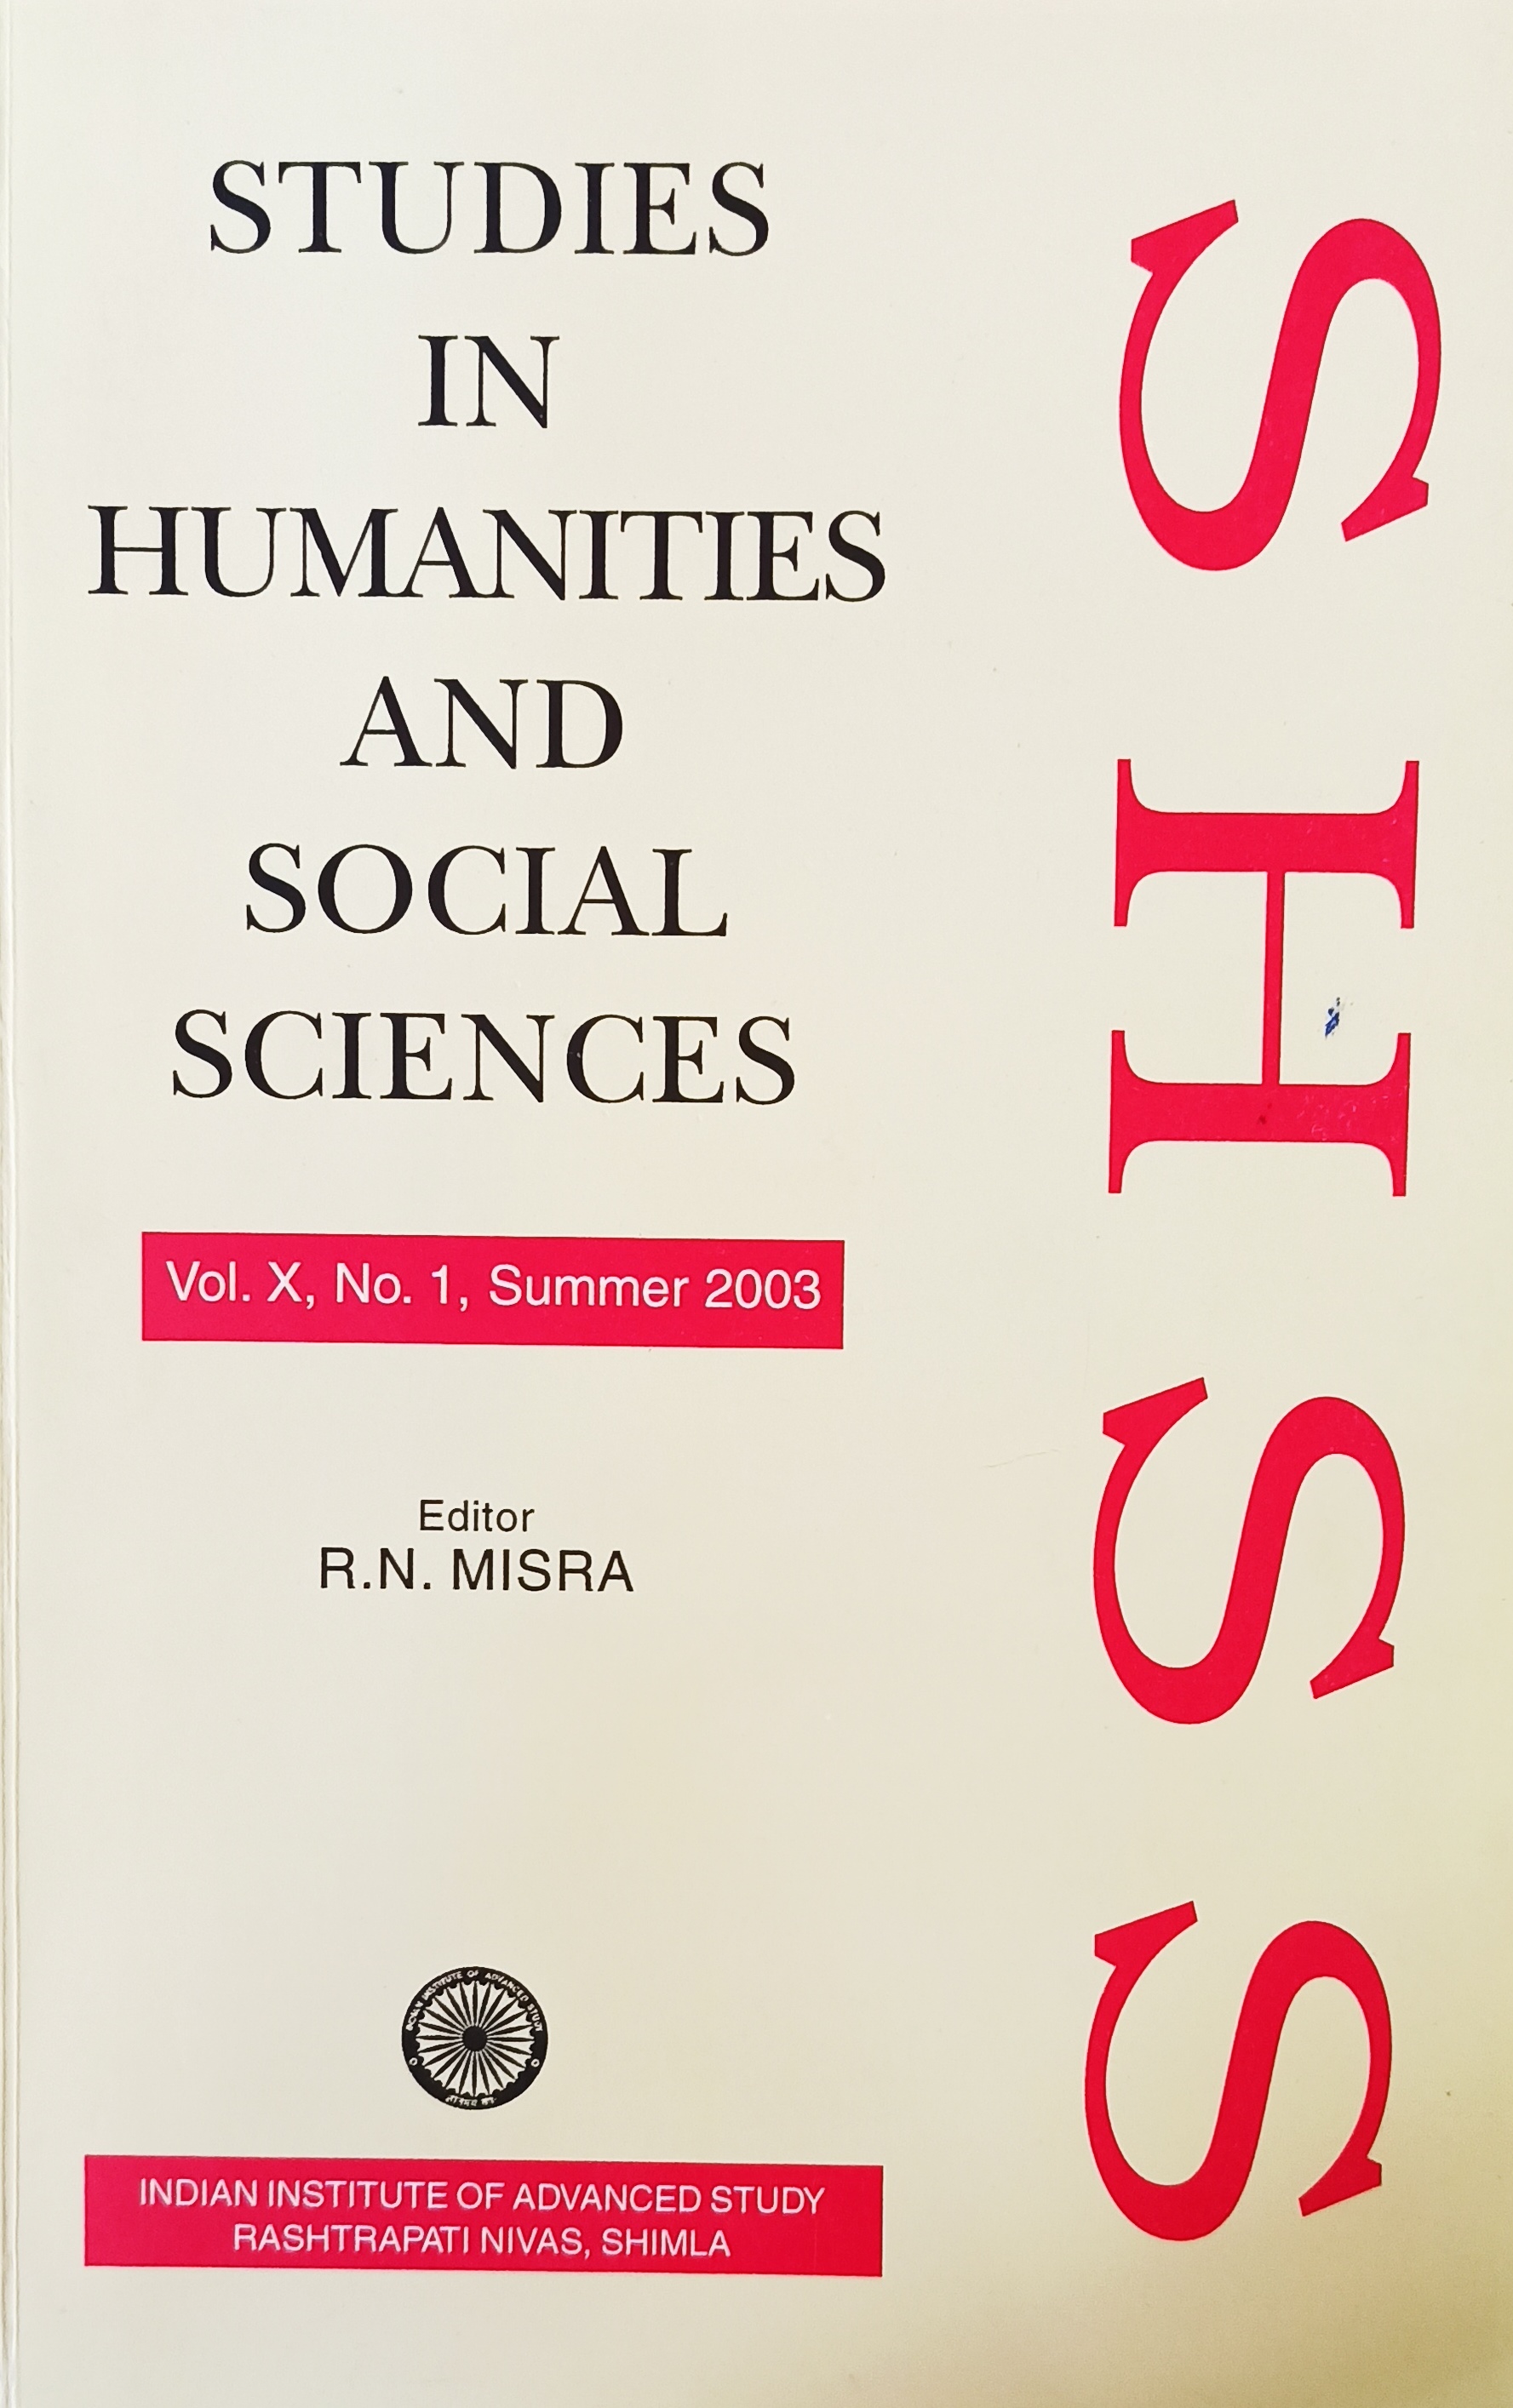 					View Vol. 10 No. 1 (2003): Studies in Humanities and Social Sciences
				